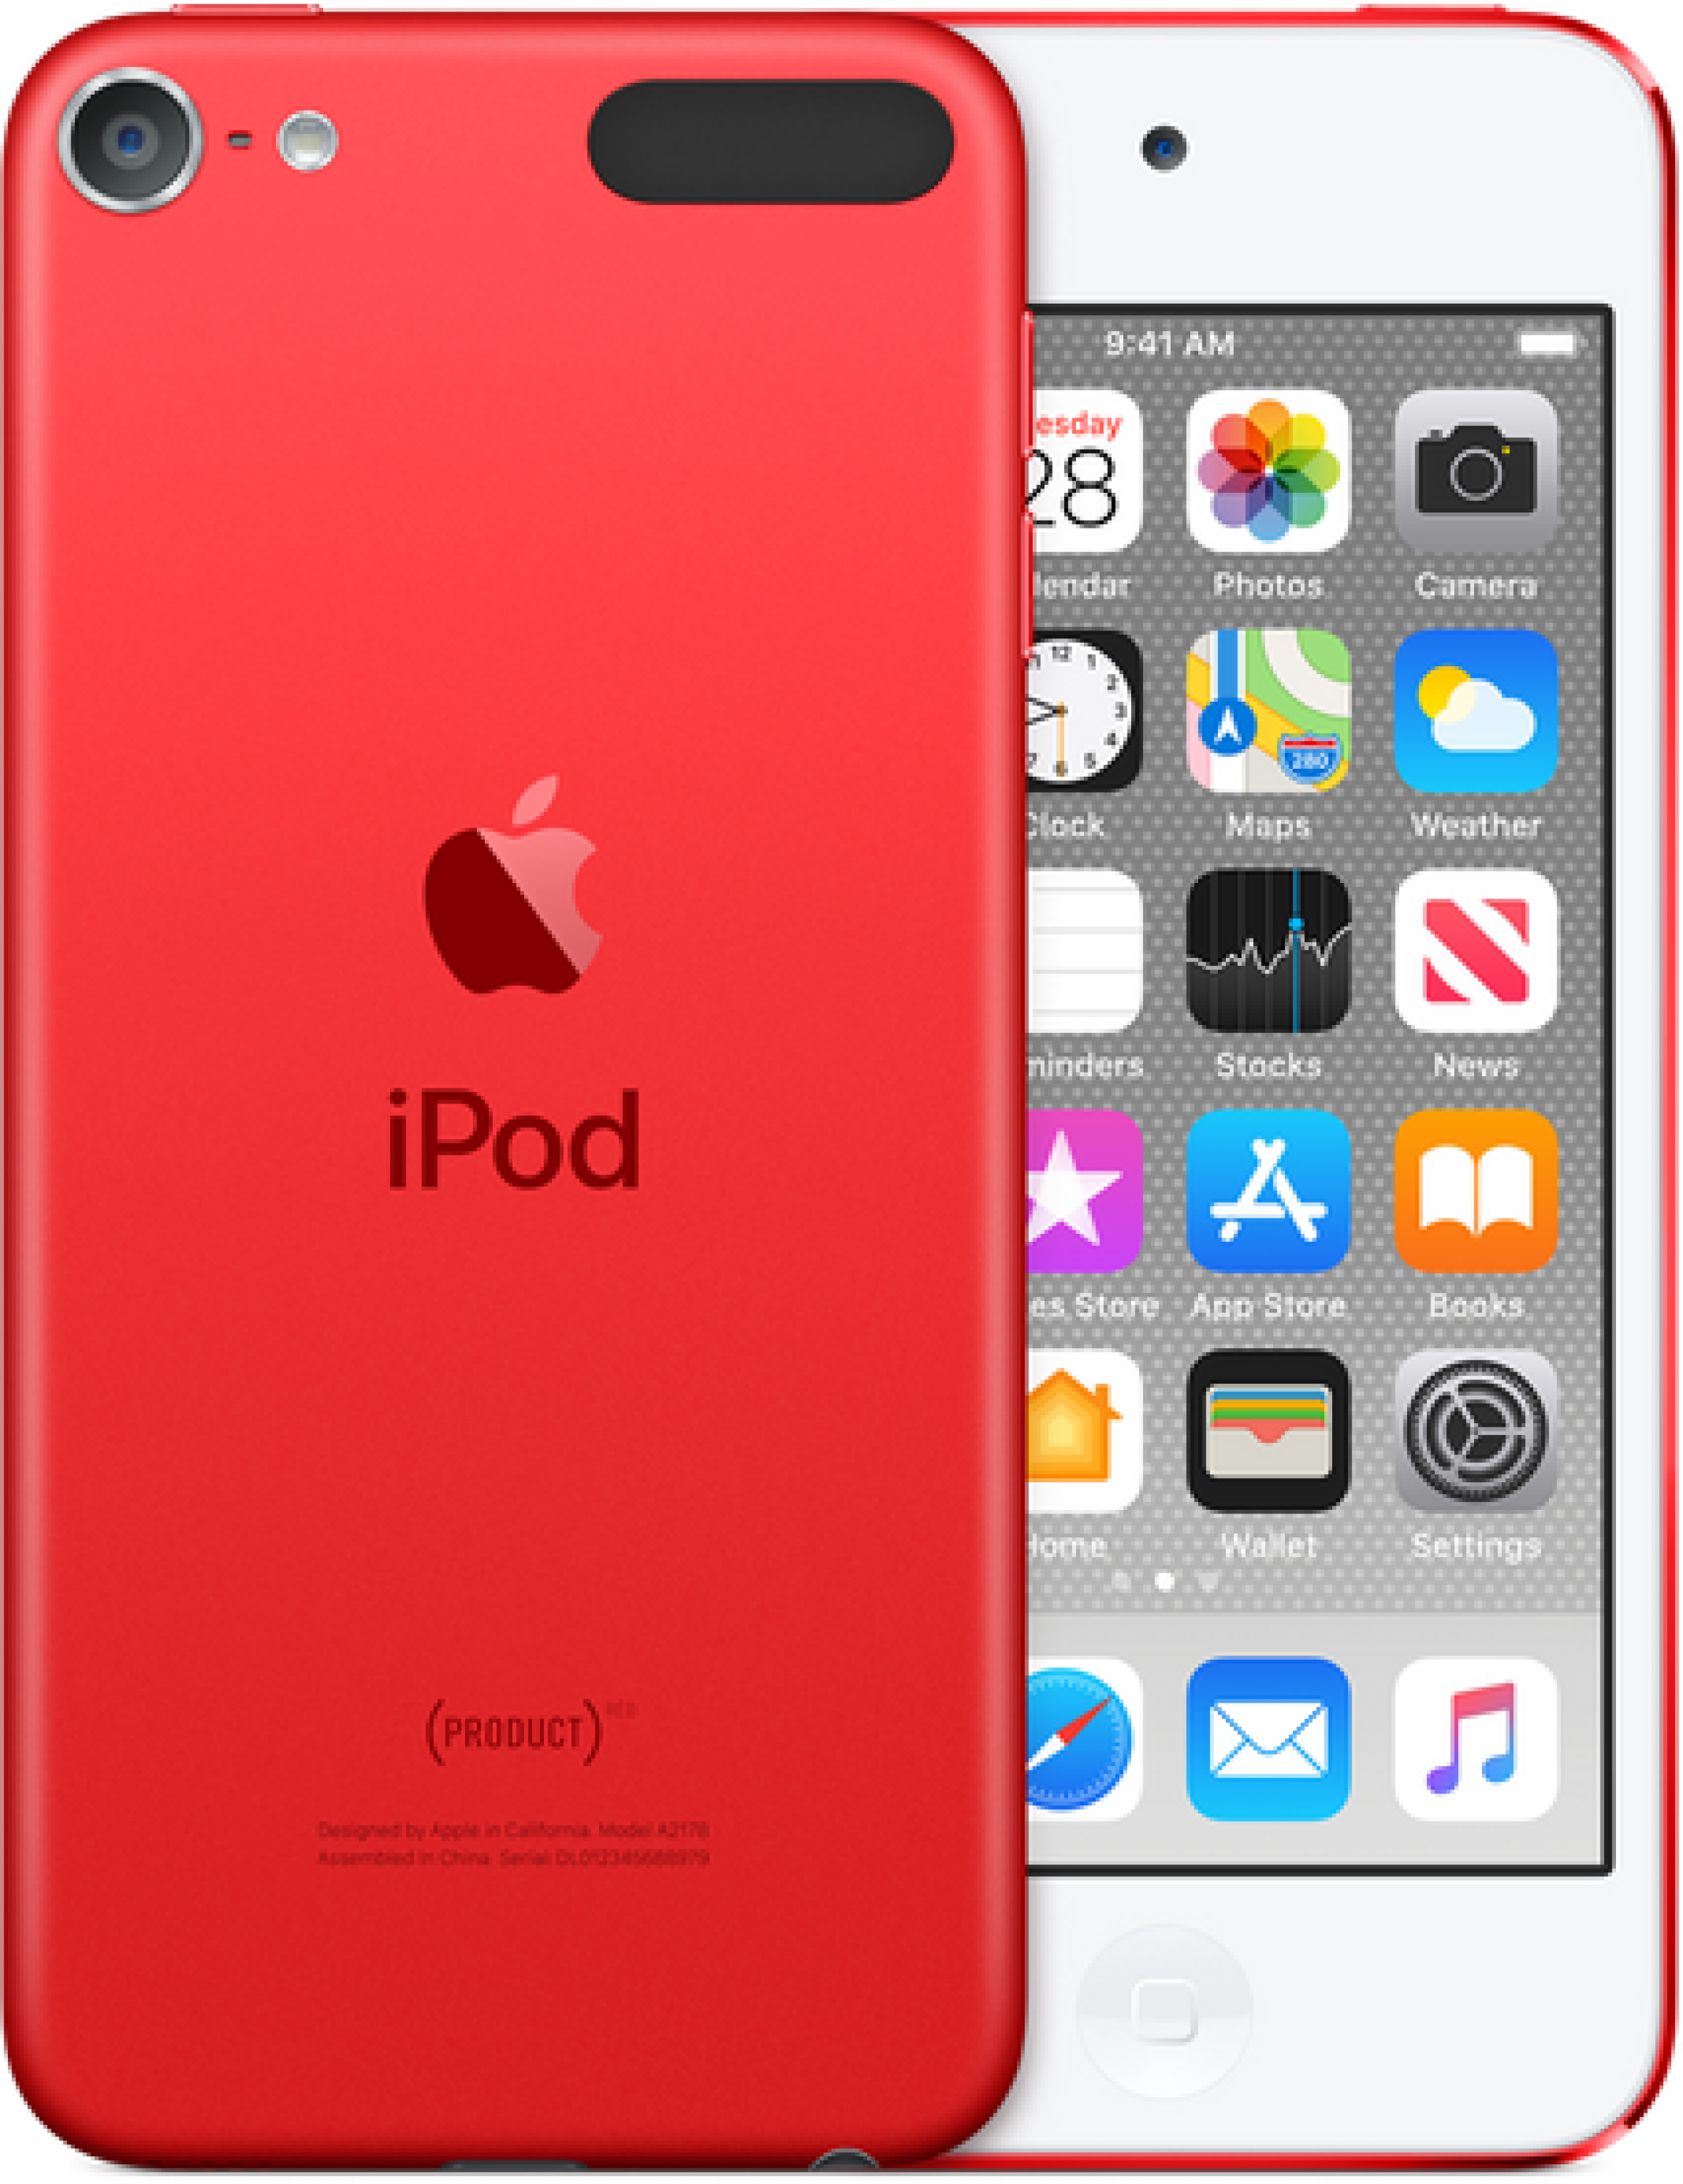 Apple's 7th Generation iPod Touch is available now for $199